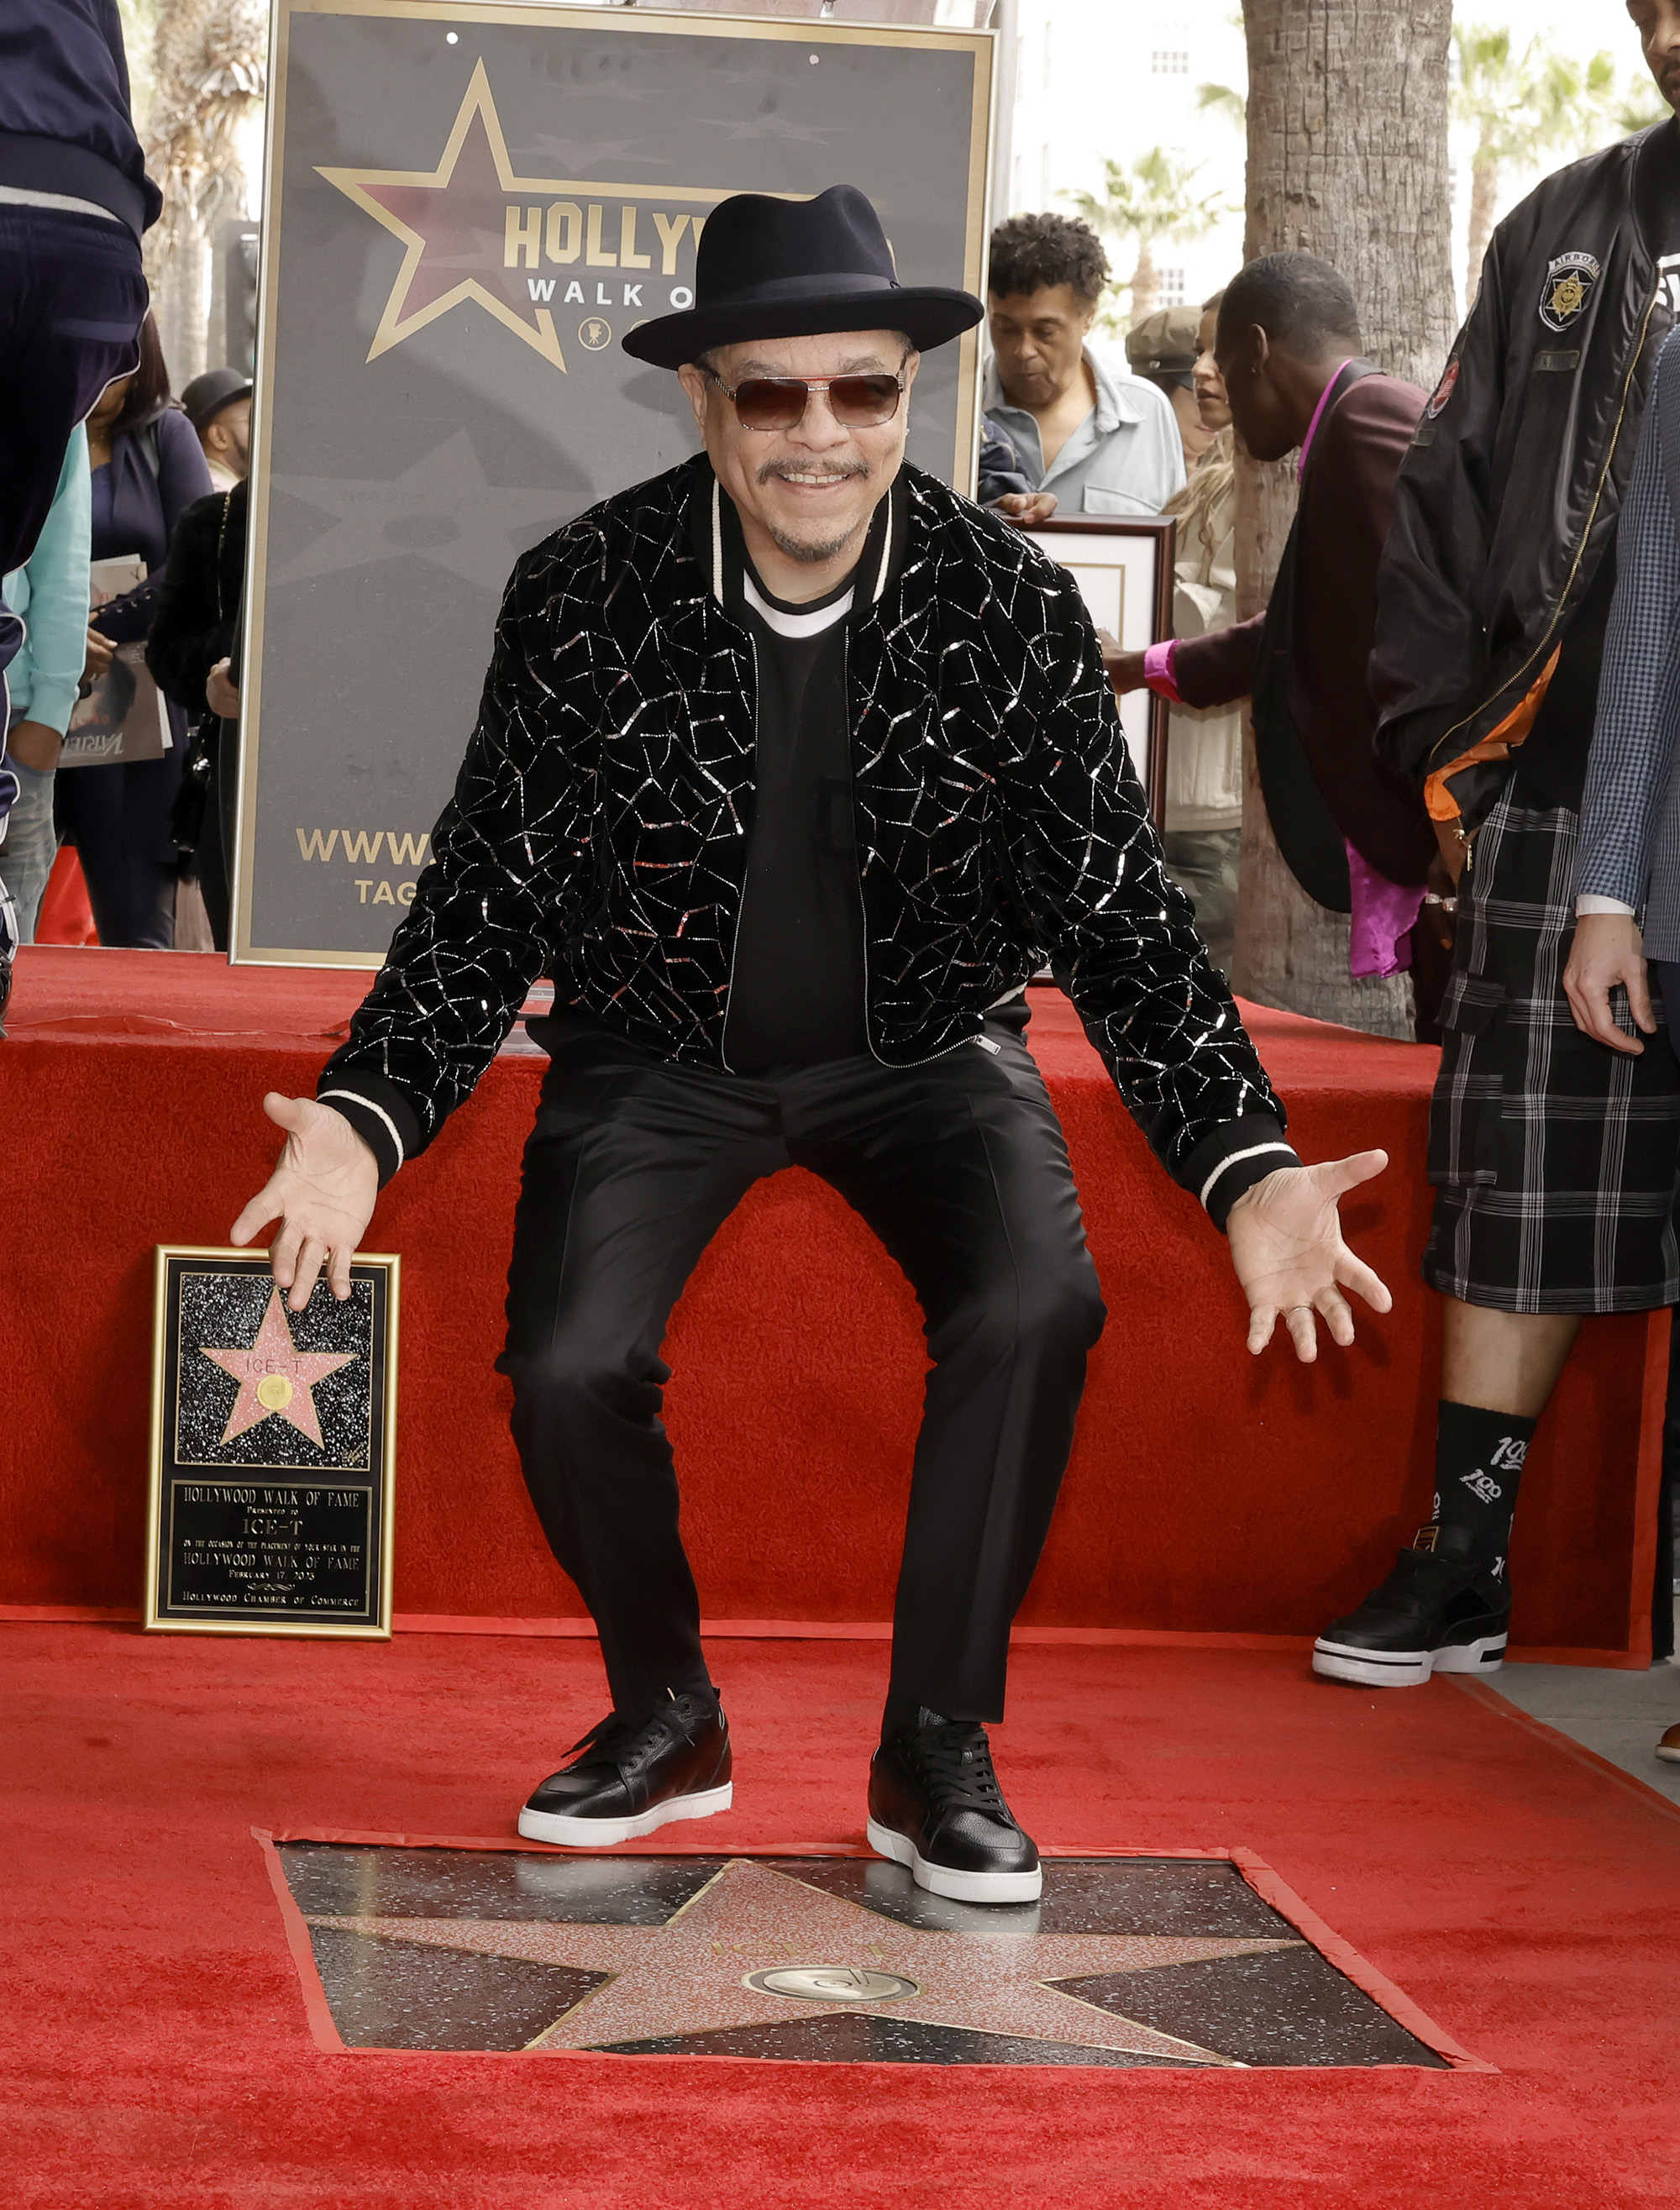 Ice-T poses onstage during his Hollywood Walk of Fame Star Ceremony on Feb. 17, 2023, in Hollywood, Calif.